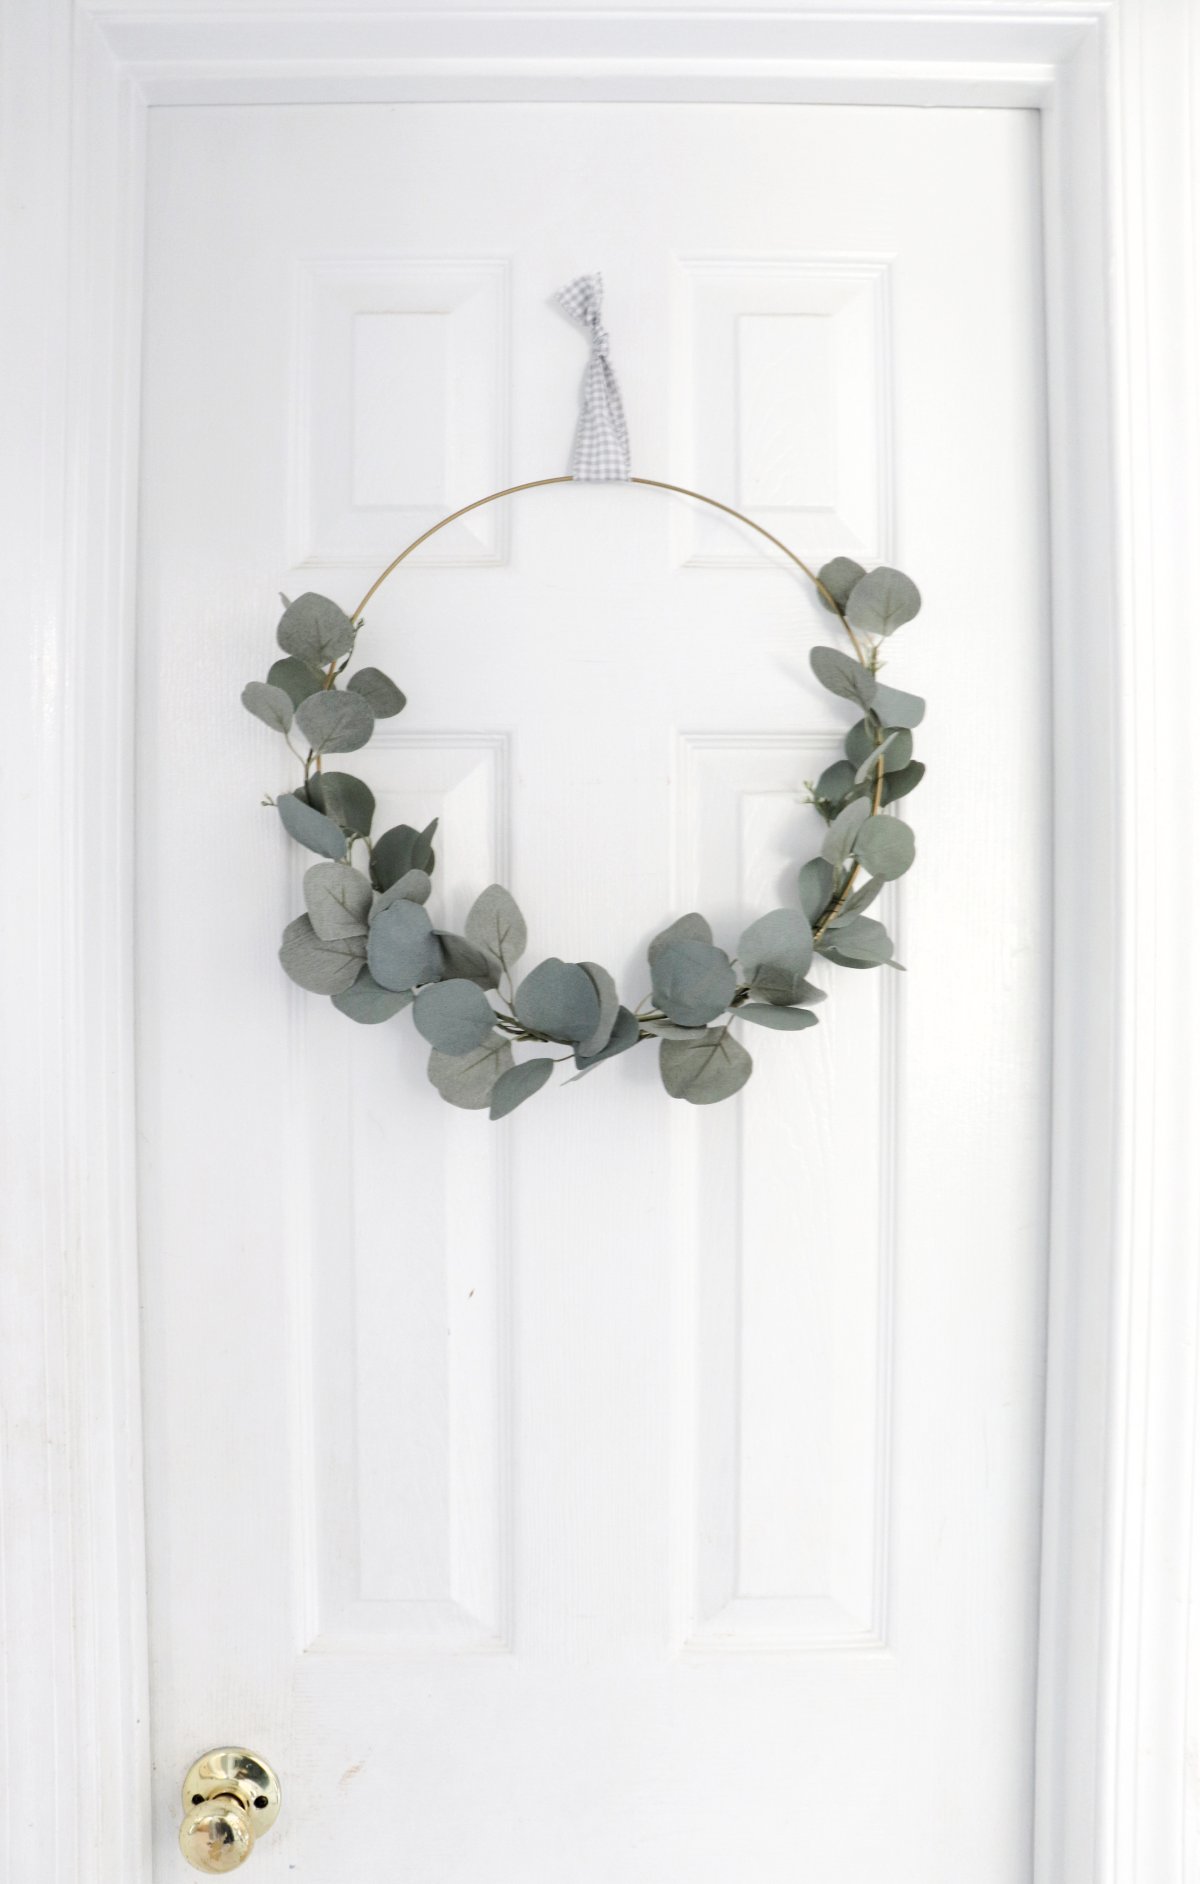 Image contains a faux eucalyptus hoop wreath hanging on a white door.